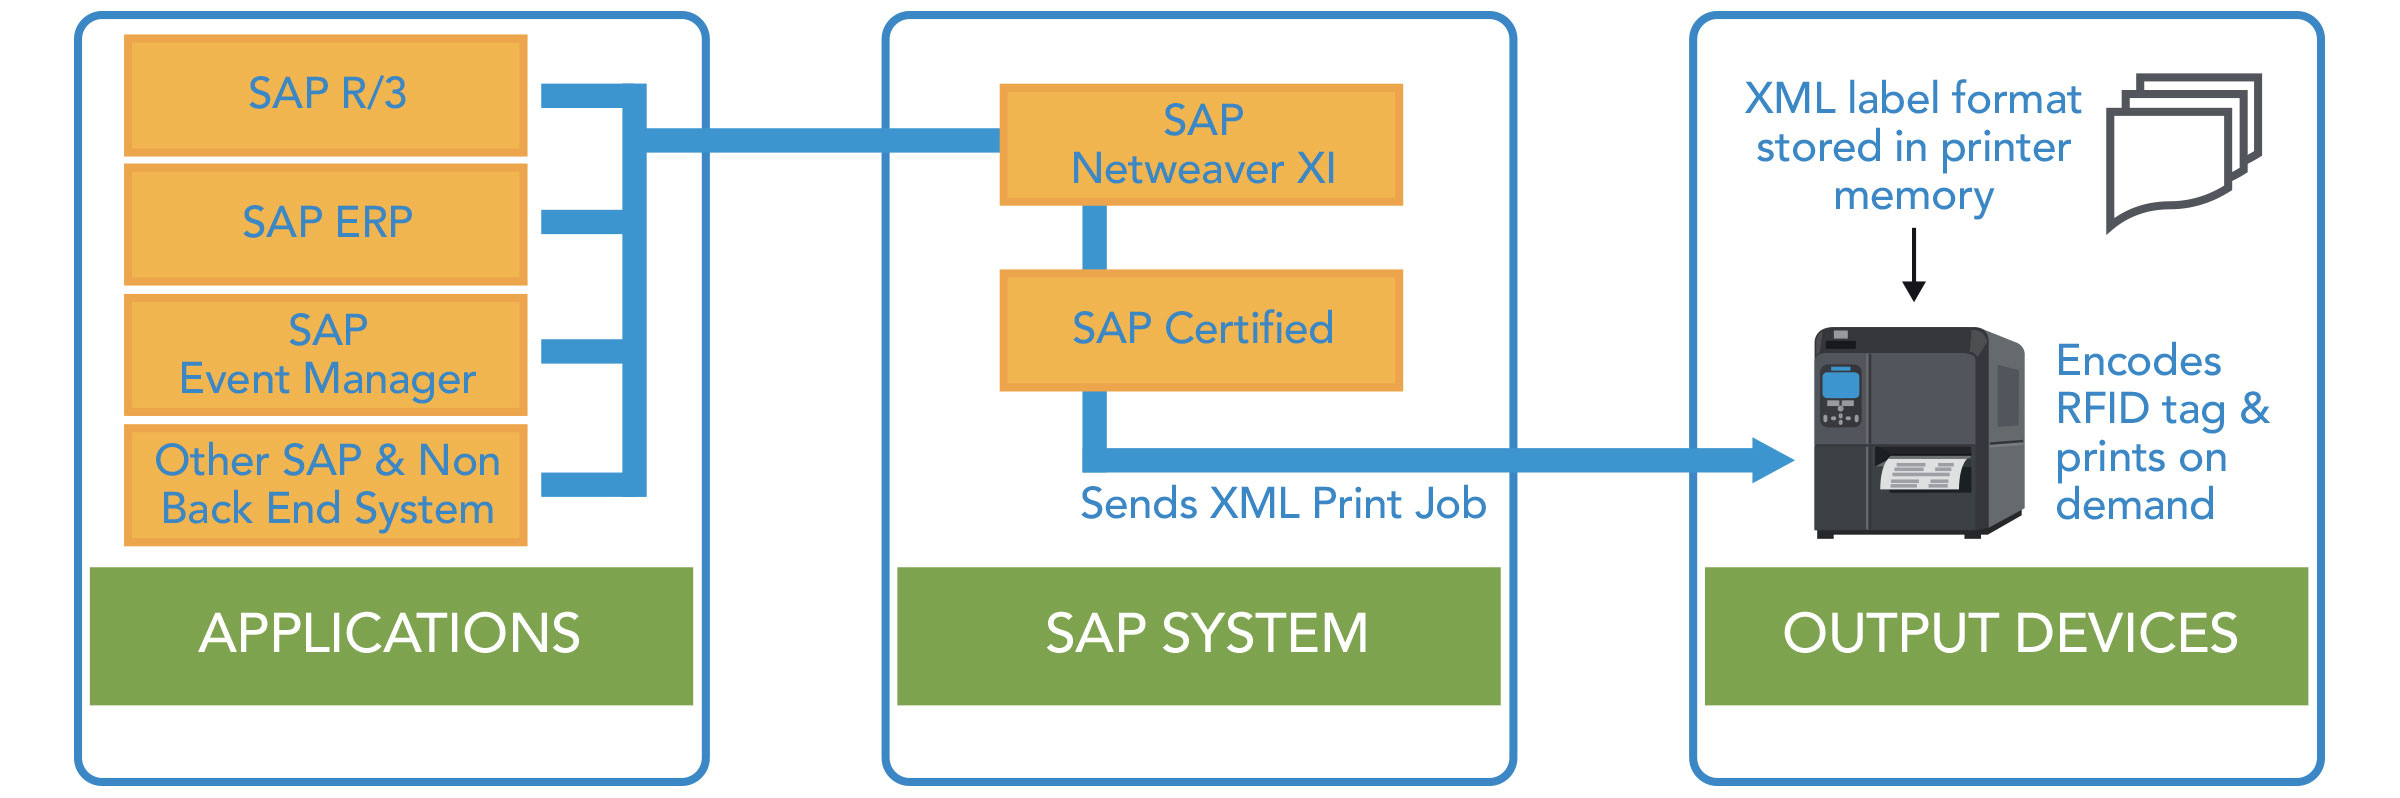 Applications > SAP System > Output Devices